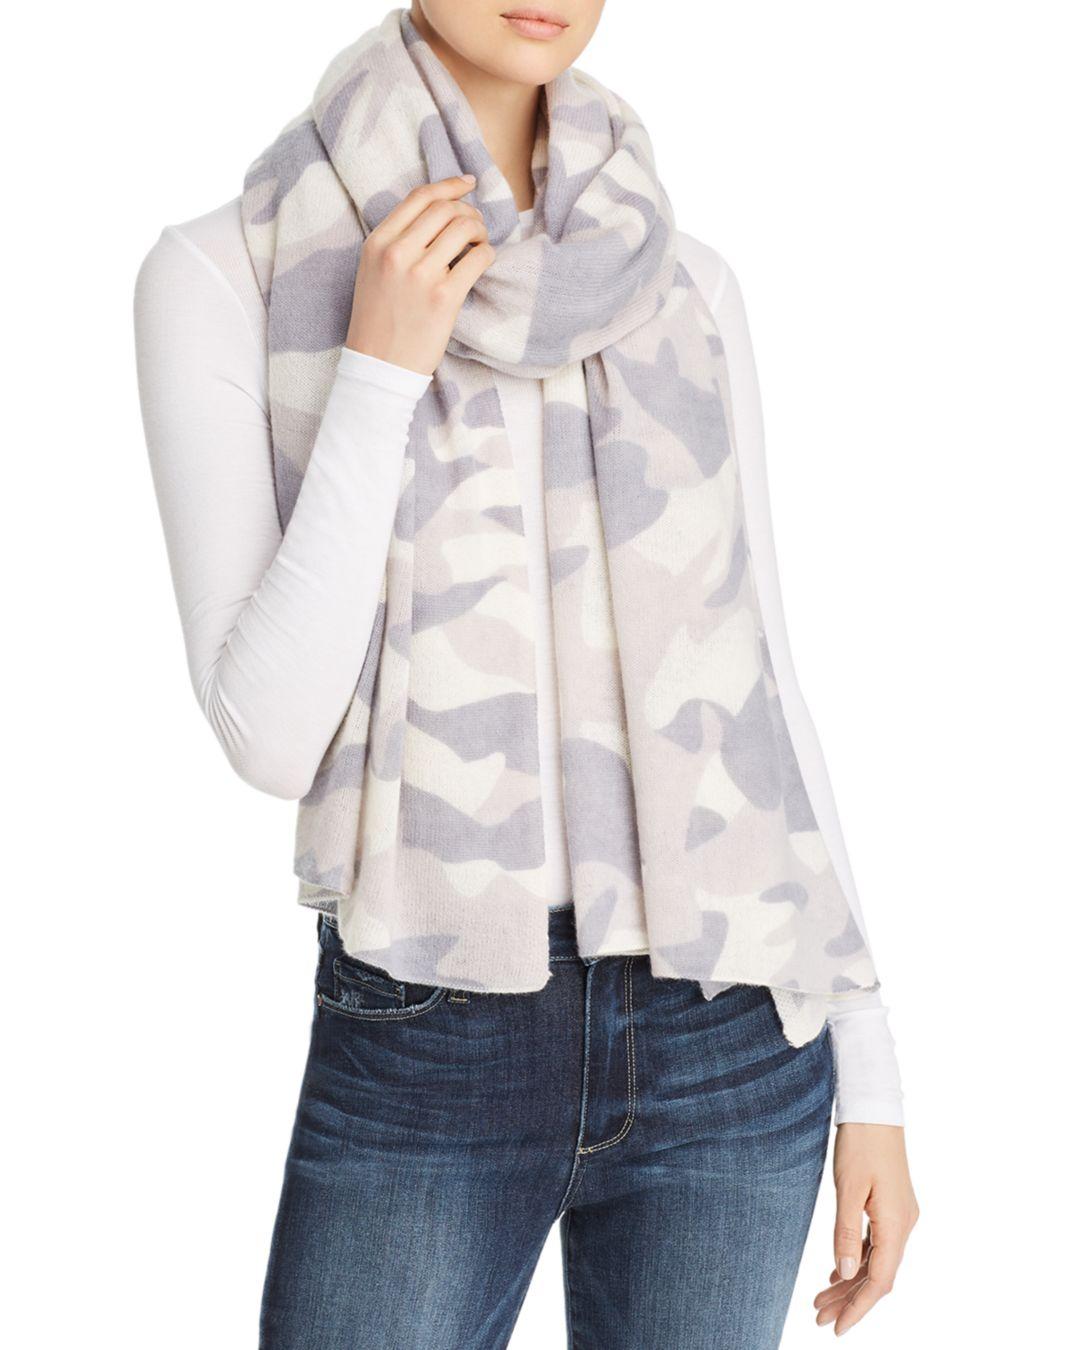 C By Bloomingdale's Camo Cashmere Travel Wrap in Gray Lyst